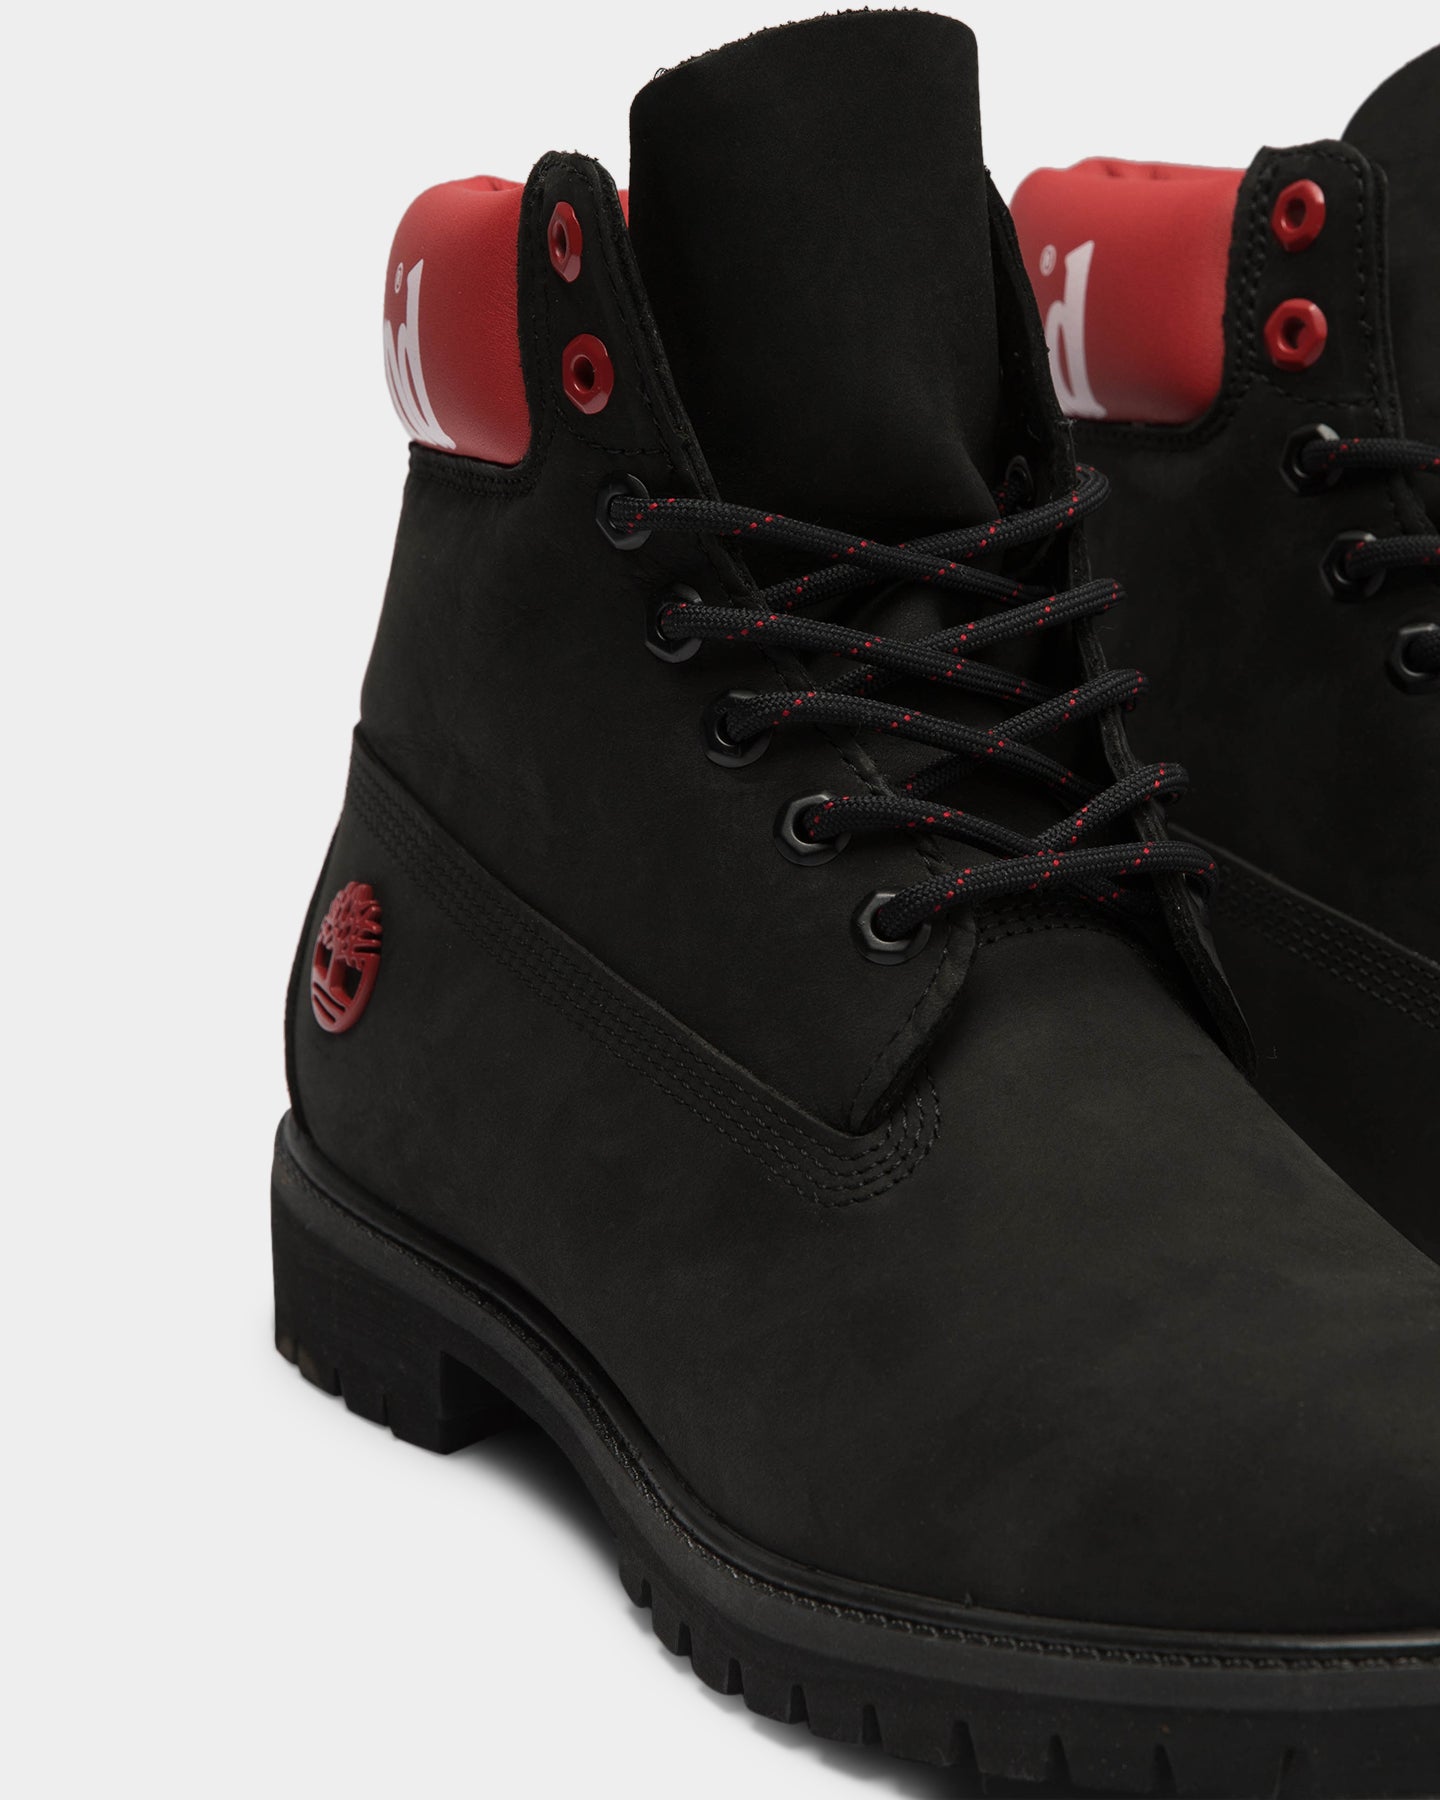 red and black timberlands